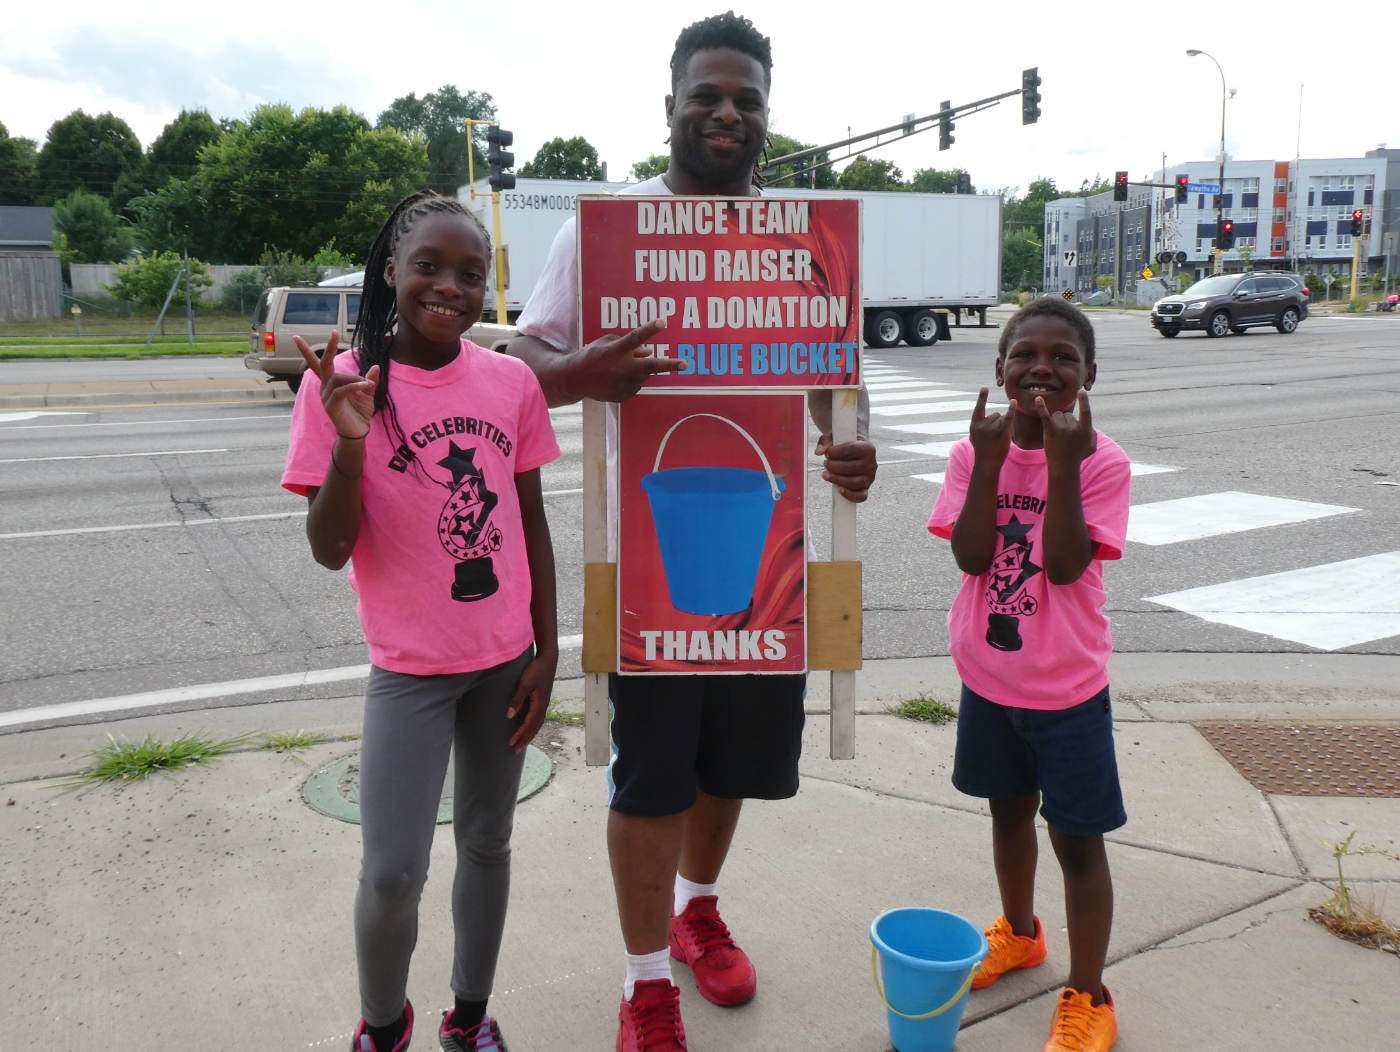 two young girls and a man posing for camera with a sign reading: DANCE TEAM FUNDRAISER, DROP A DONATION with picture of a blue bucket, and a blue bucket on the ground